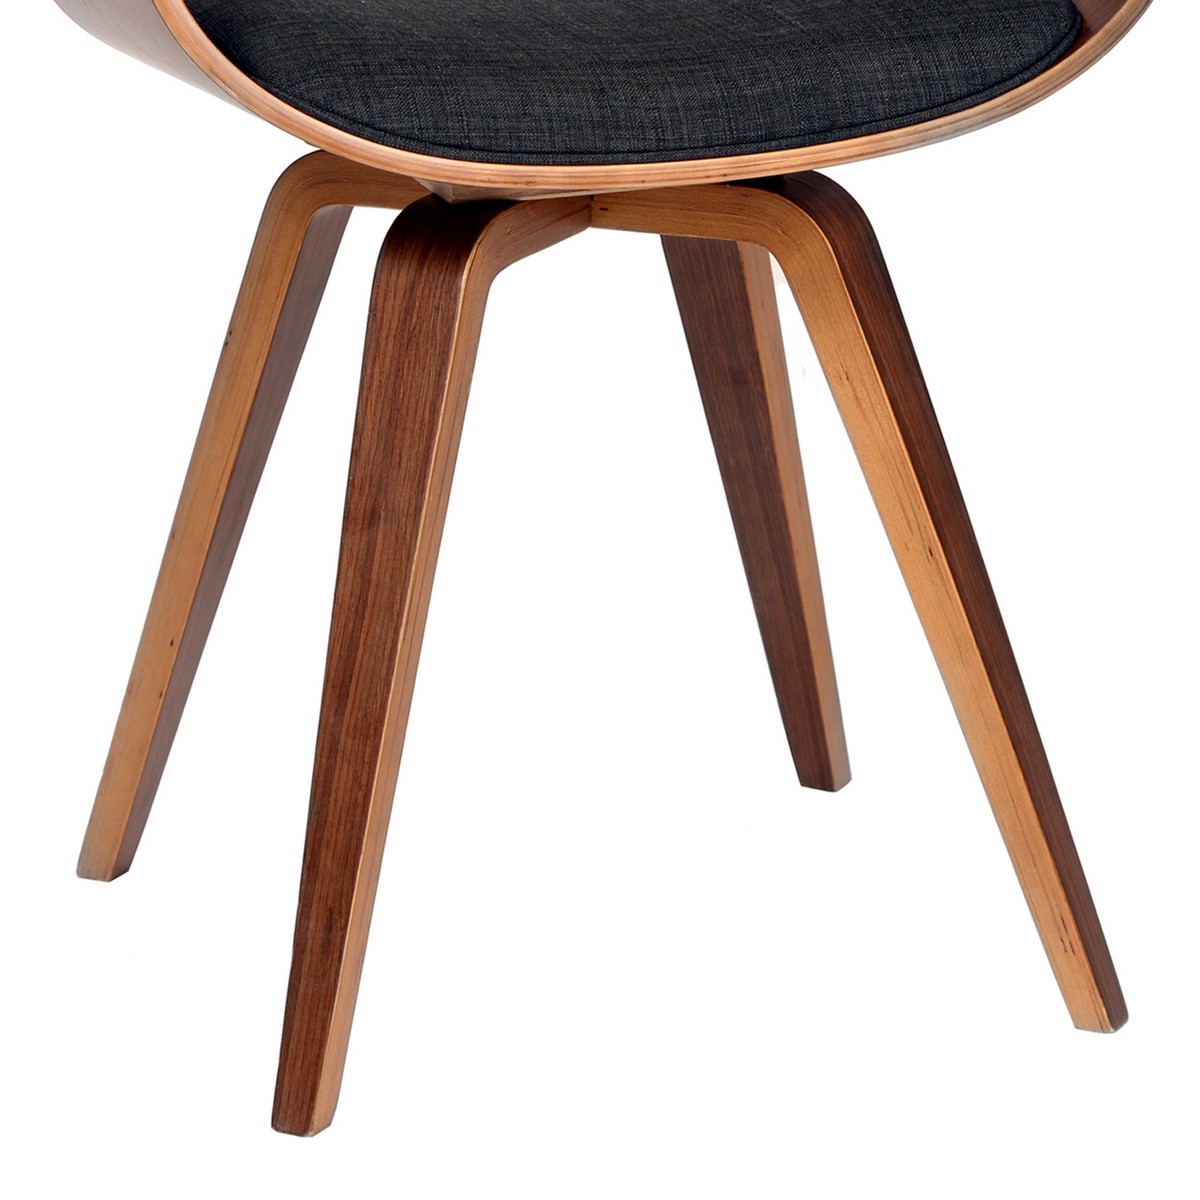 Armen Living Summer Modern Chair In Charcoal Fabric and Walnut Wood